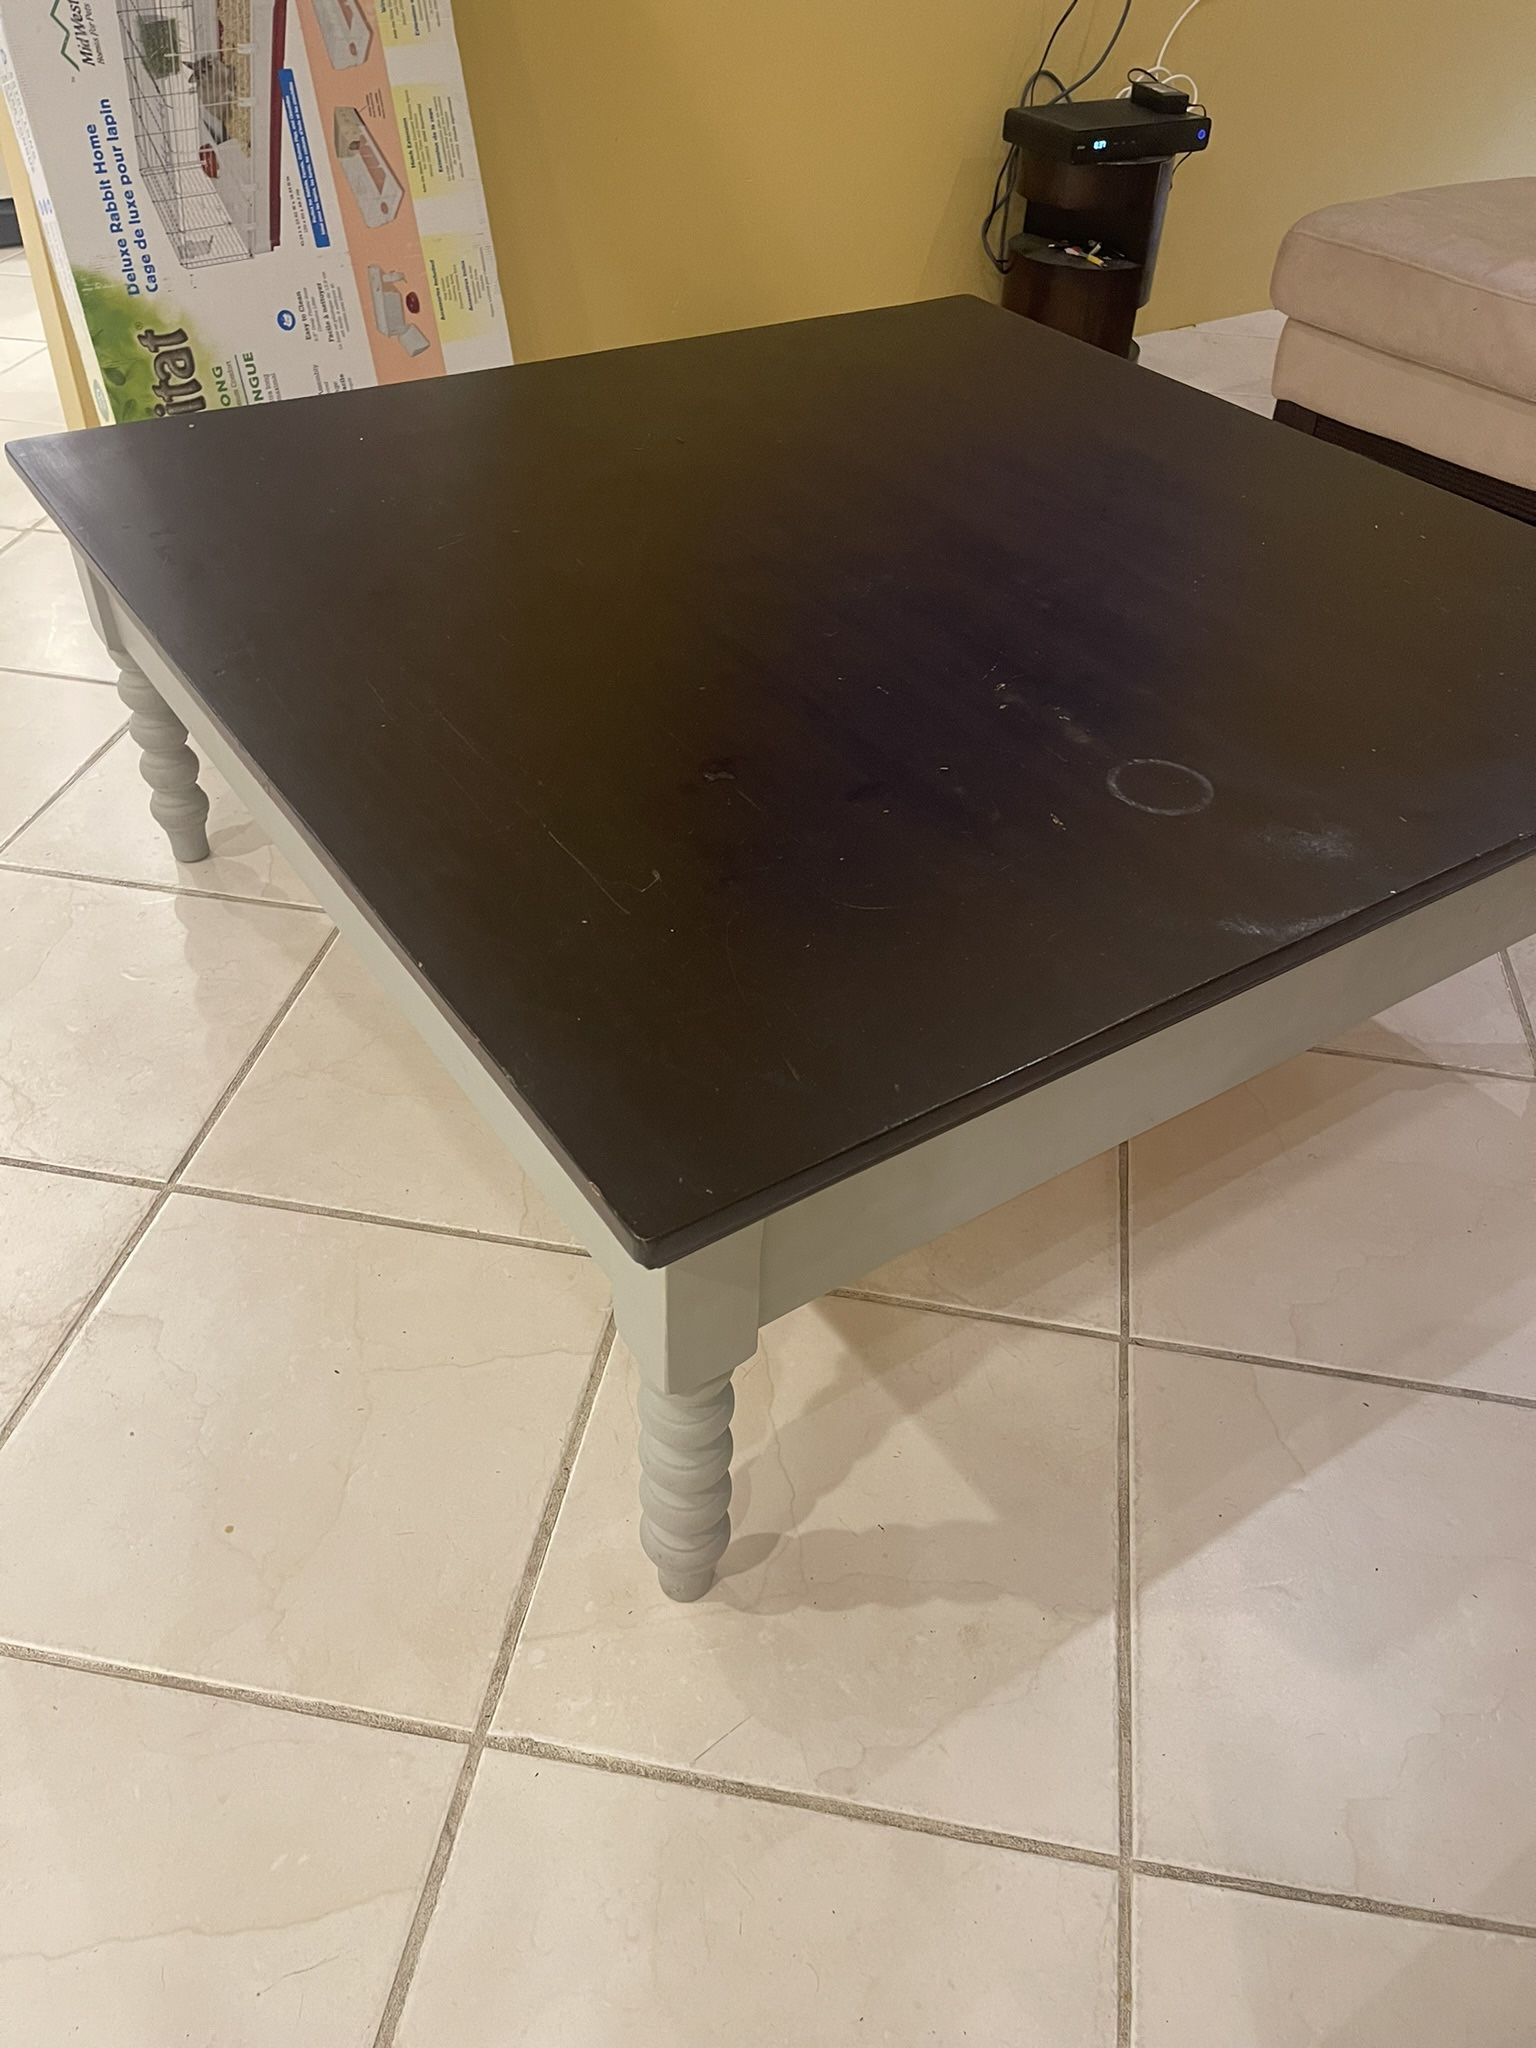 Large Wood Coffee Table - ONLY $20